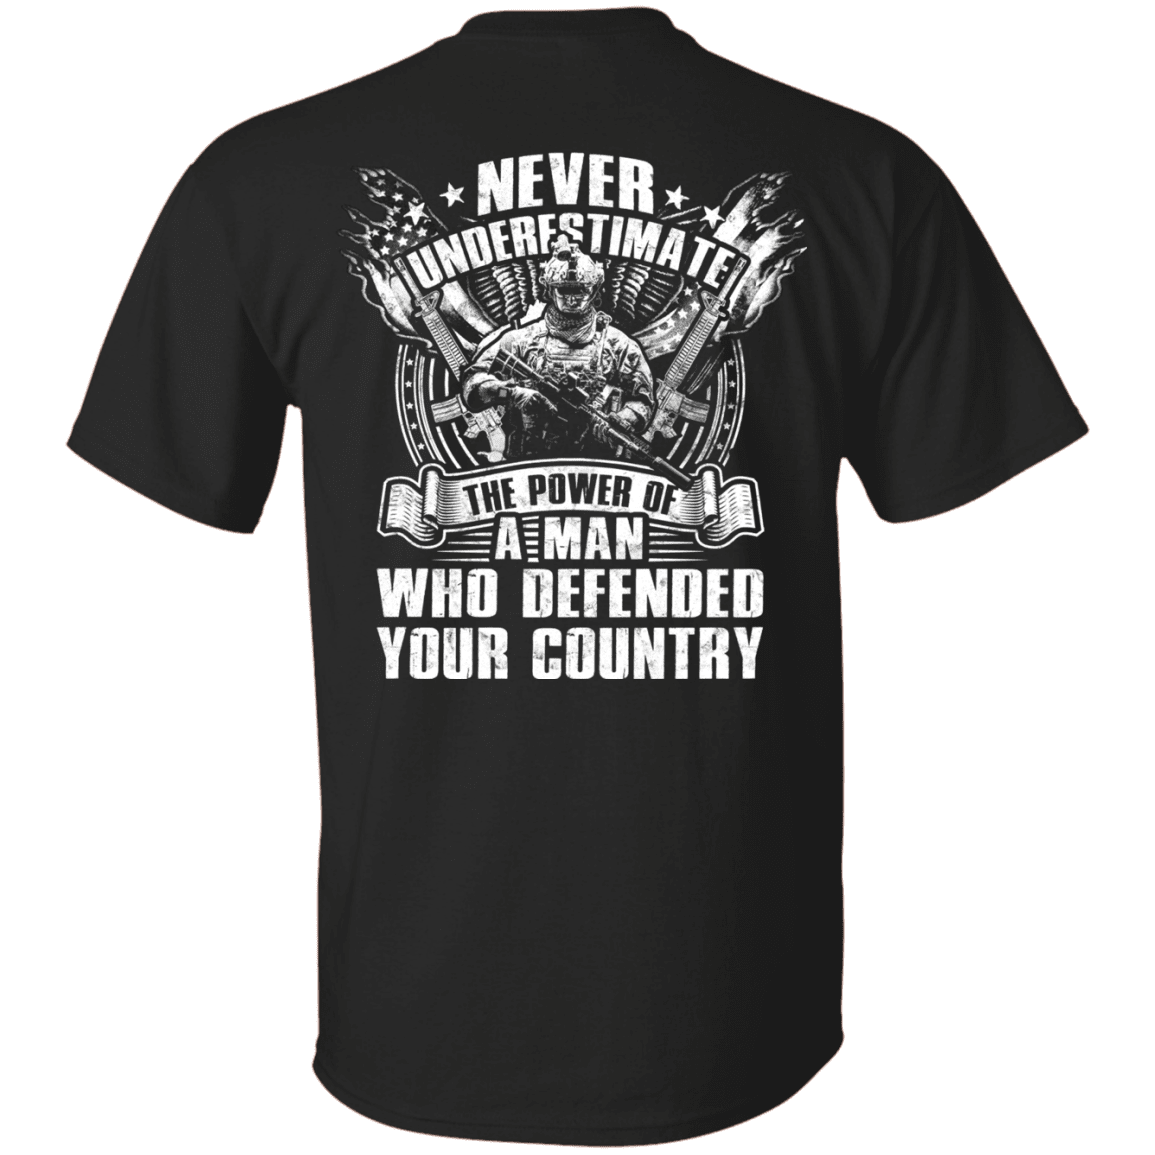 Military T-Shirt "Never Underestimate The Power of Man Defended Country" Men Back-TShirt-General-Veterans Nation